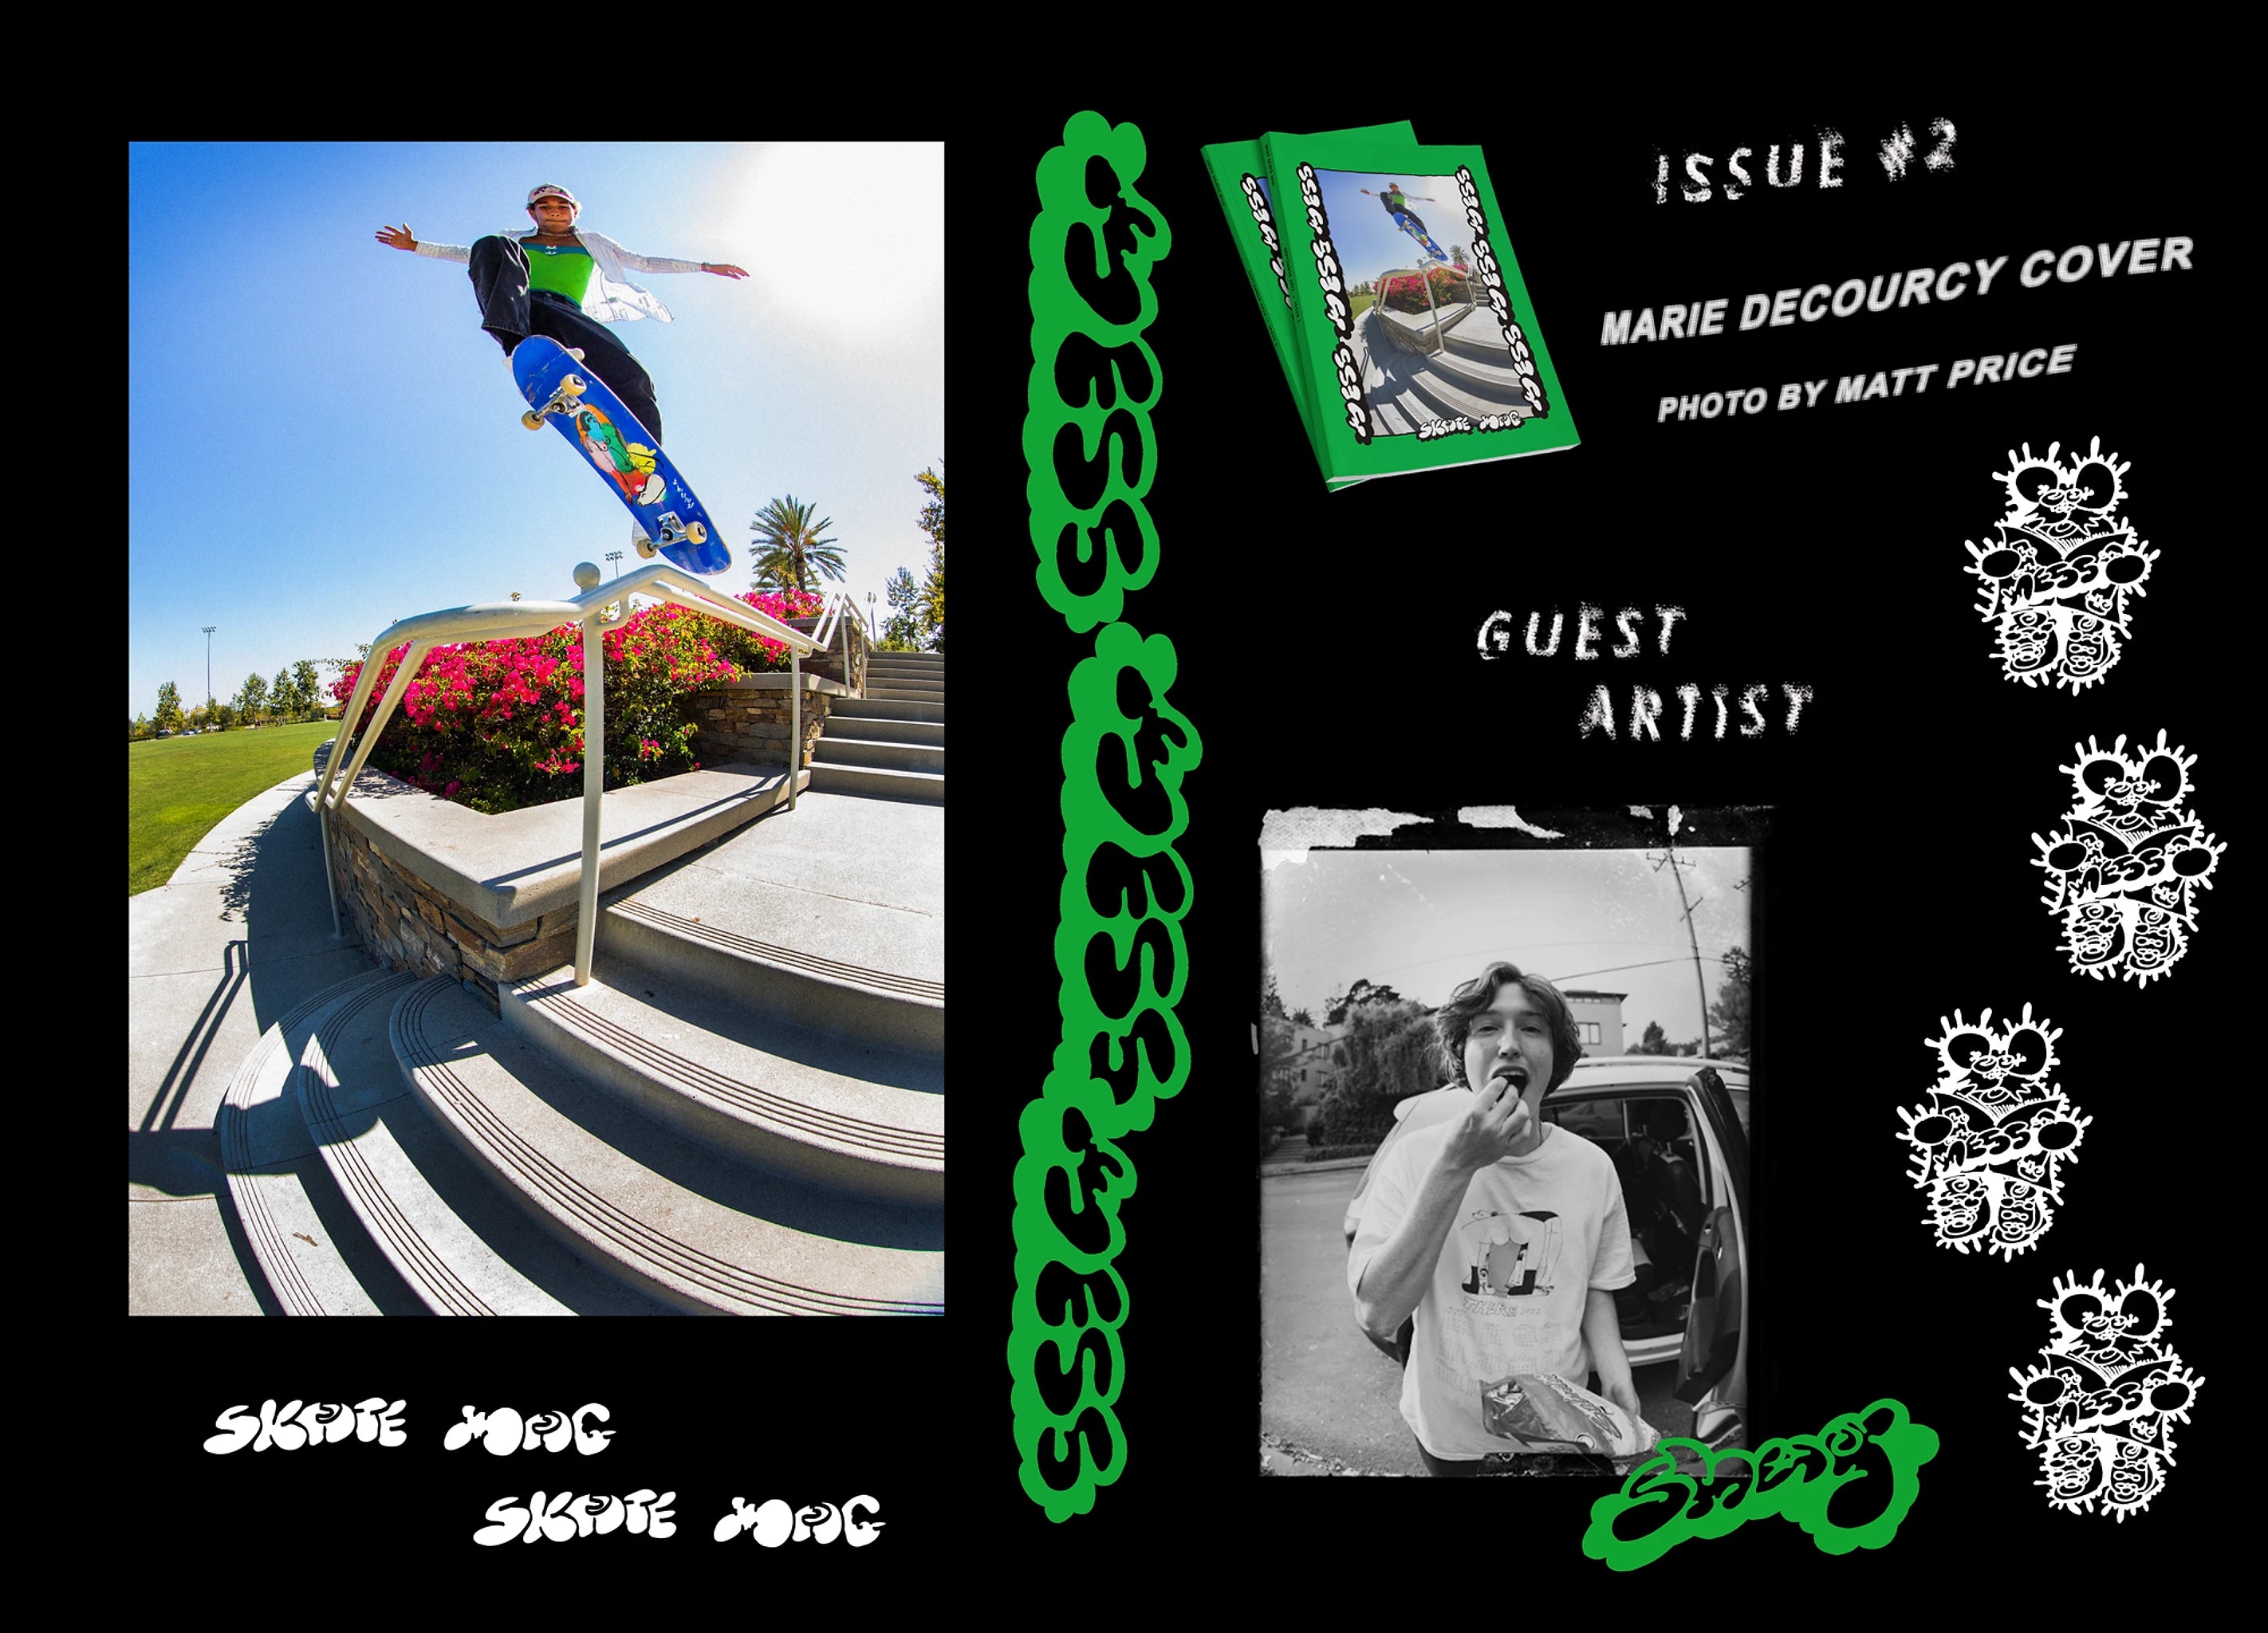 ISSUE 2 - MESS SKATE MAG